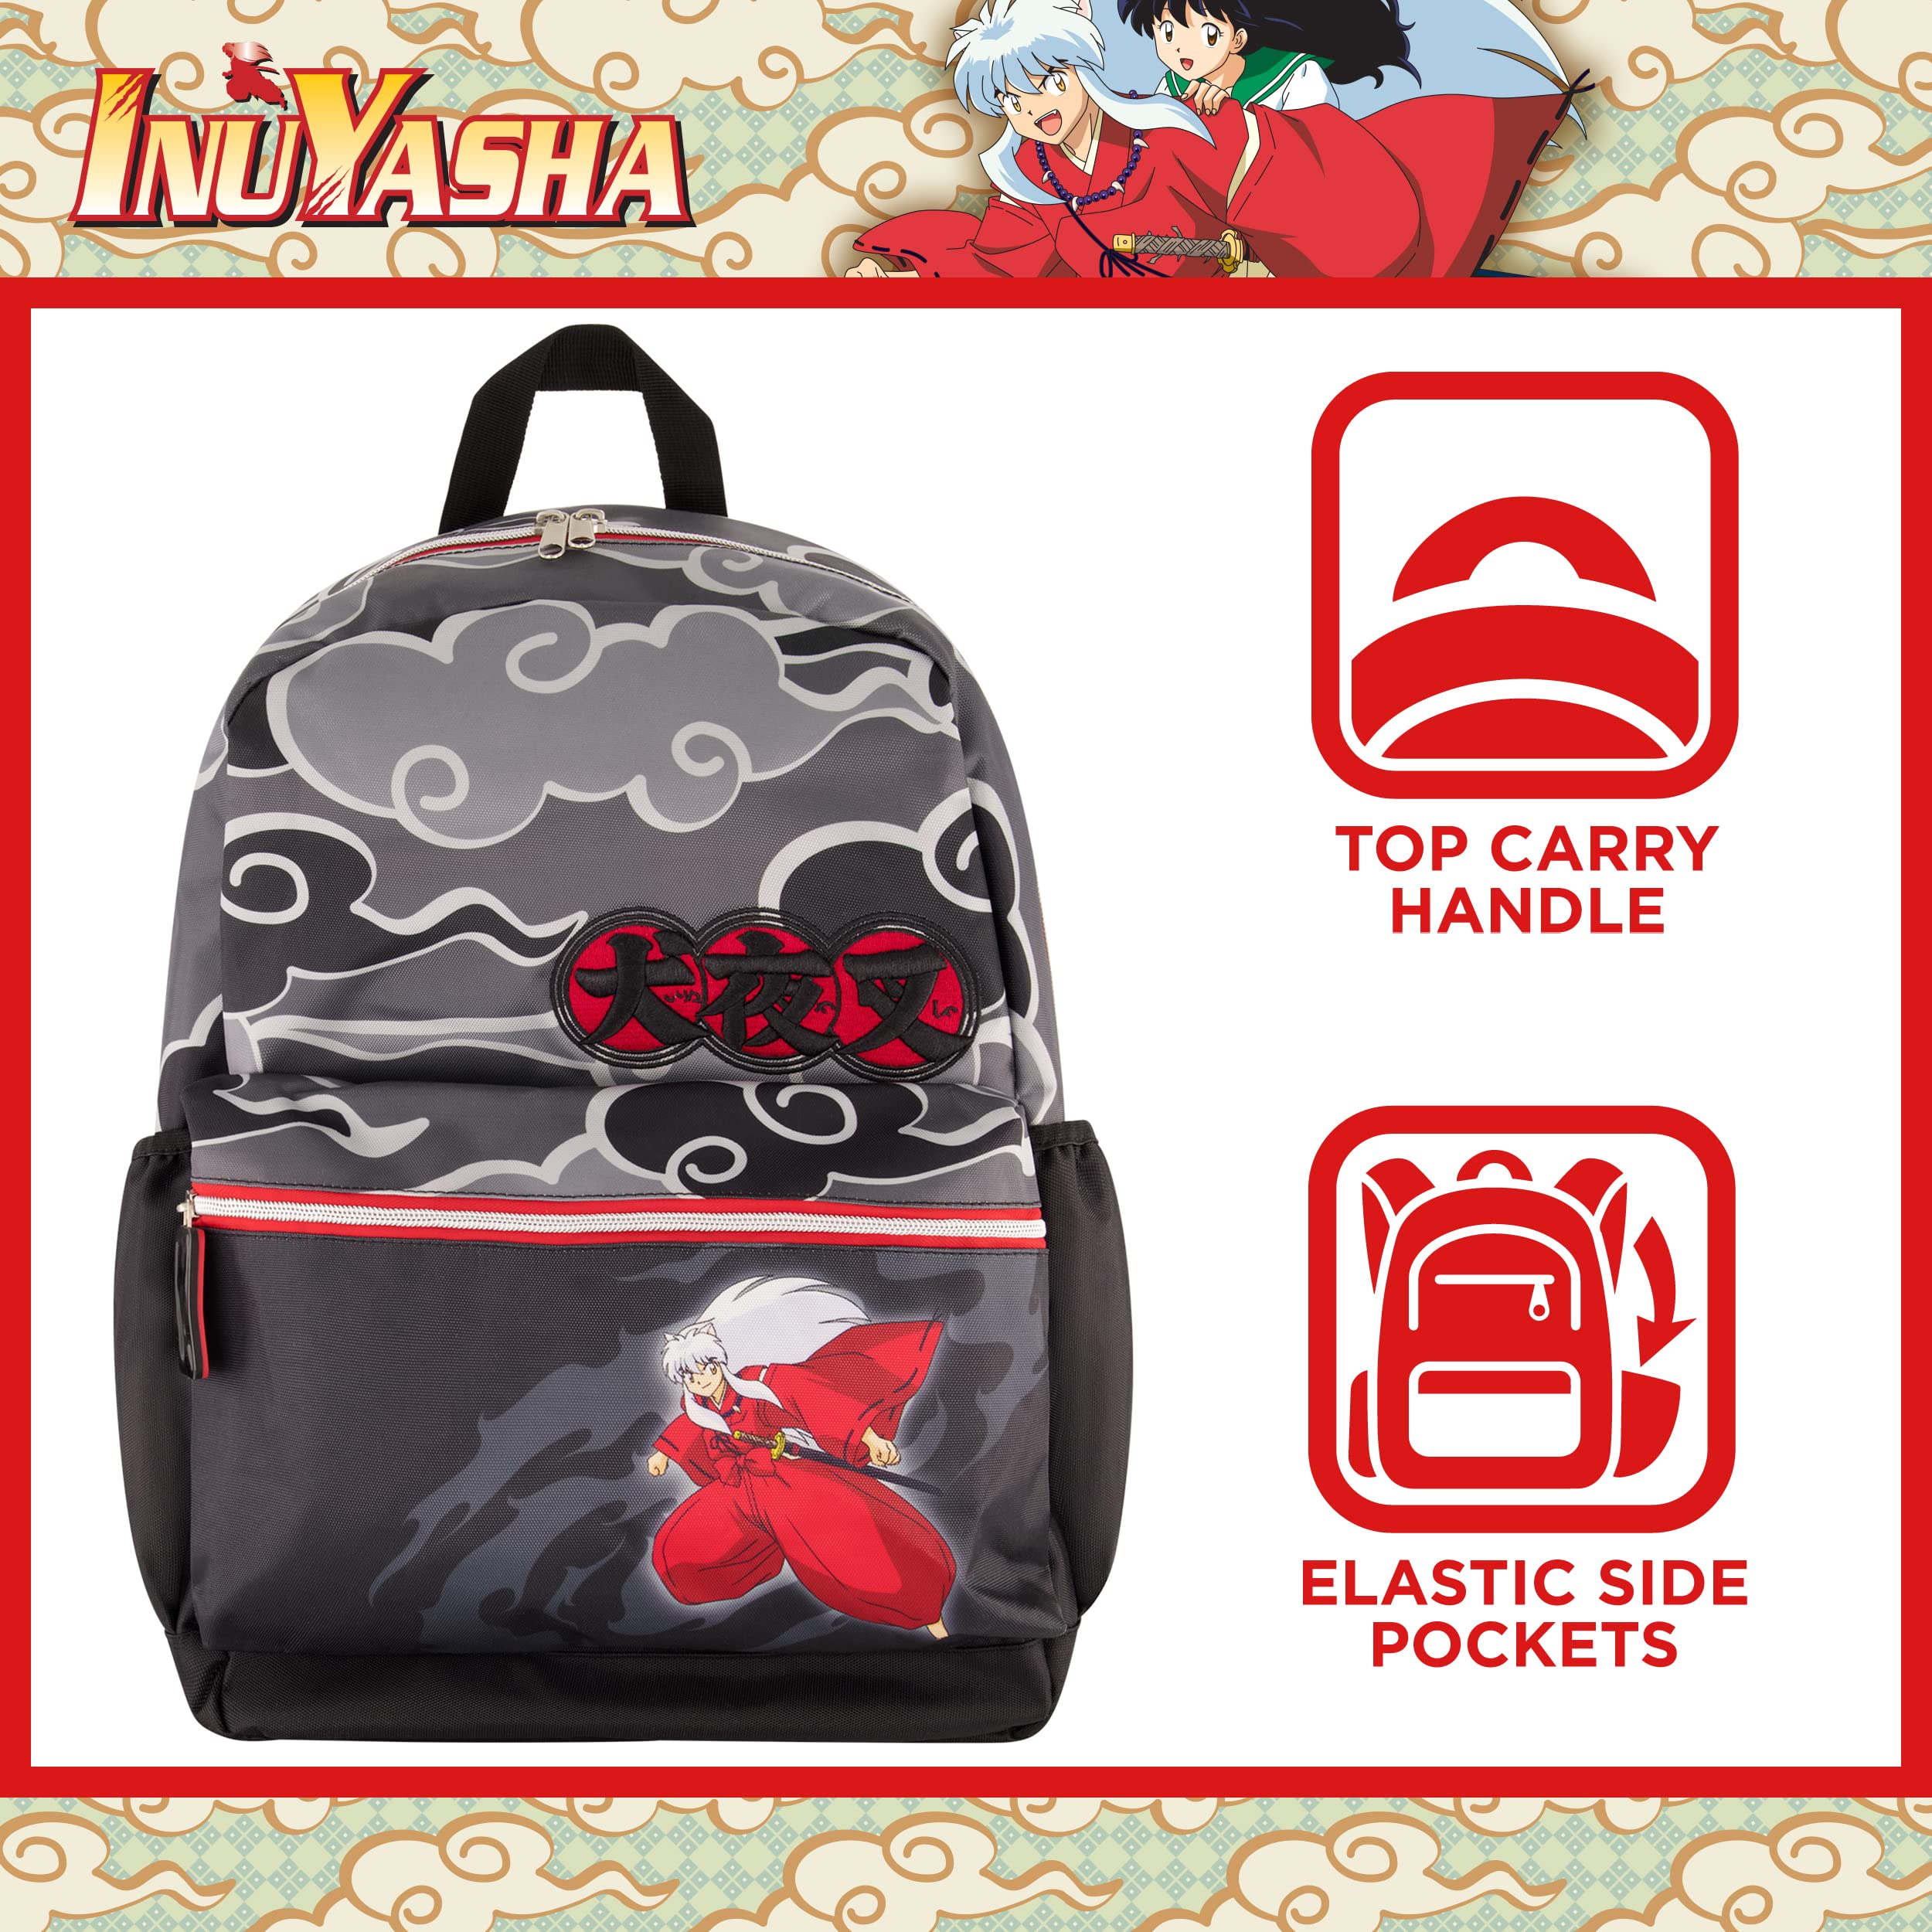 Concept One InuYasha 13 Inch Sleeve Laptop Backpack, Padded Computer Bag for Commute or Travel, Multi